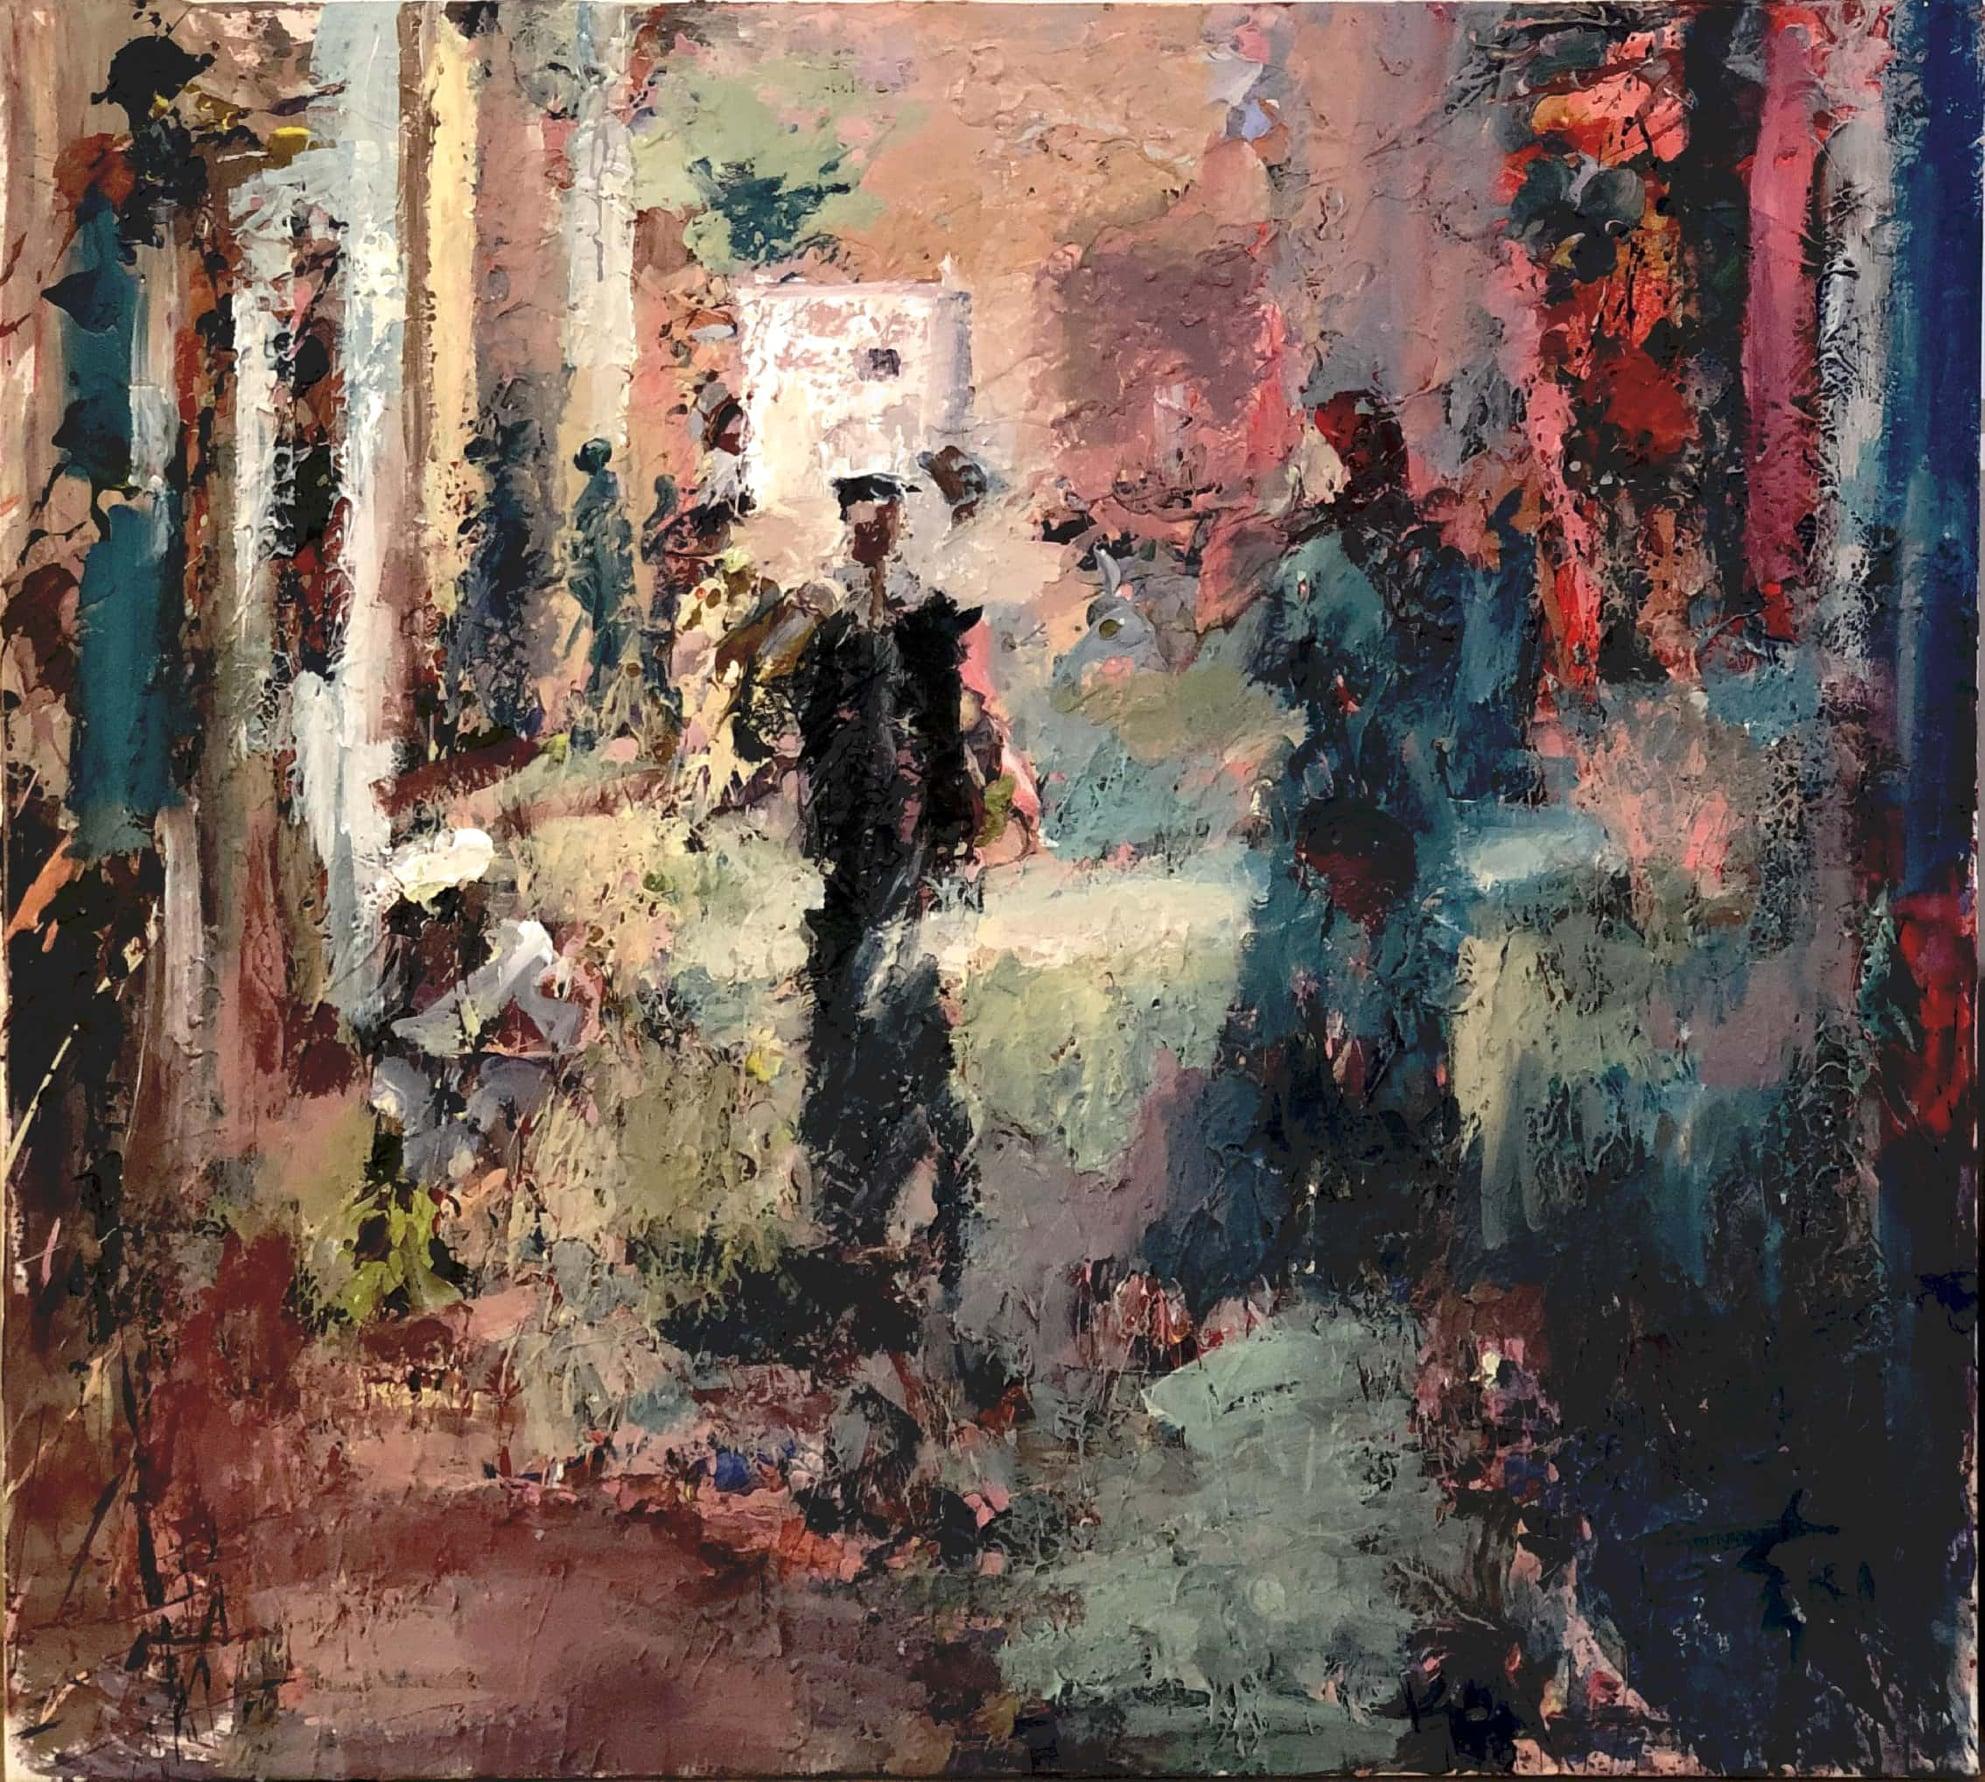 "Untitled 82" Abstract Painting 39" x 35" inch by Ahmed Dafrawy 